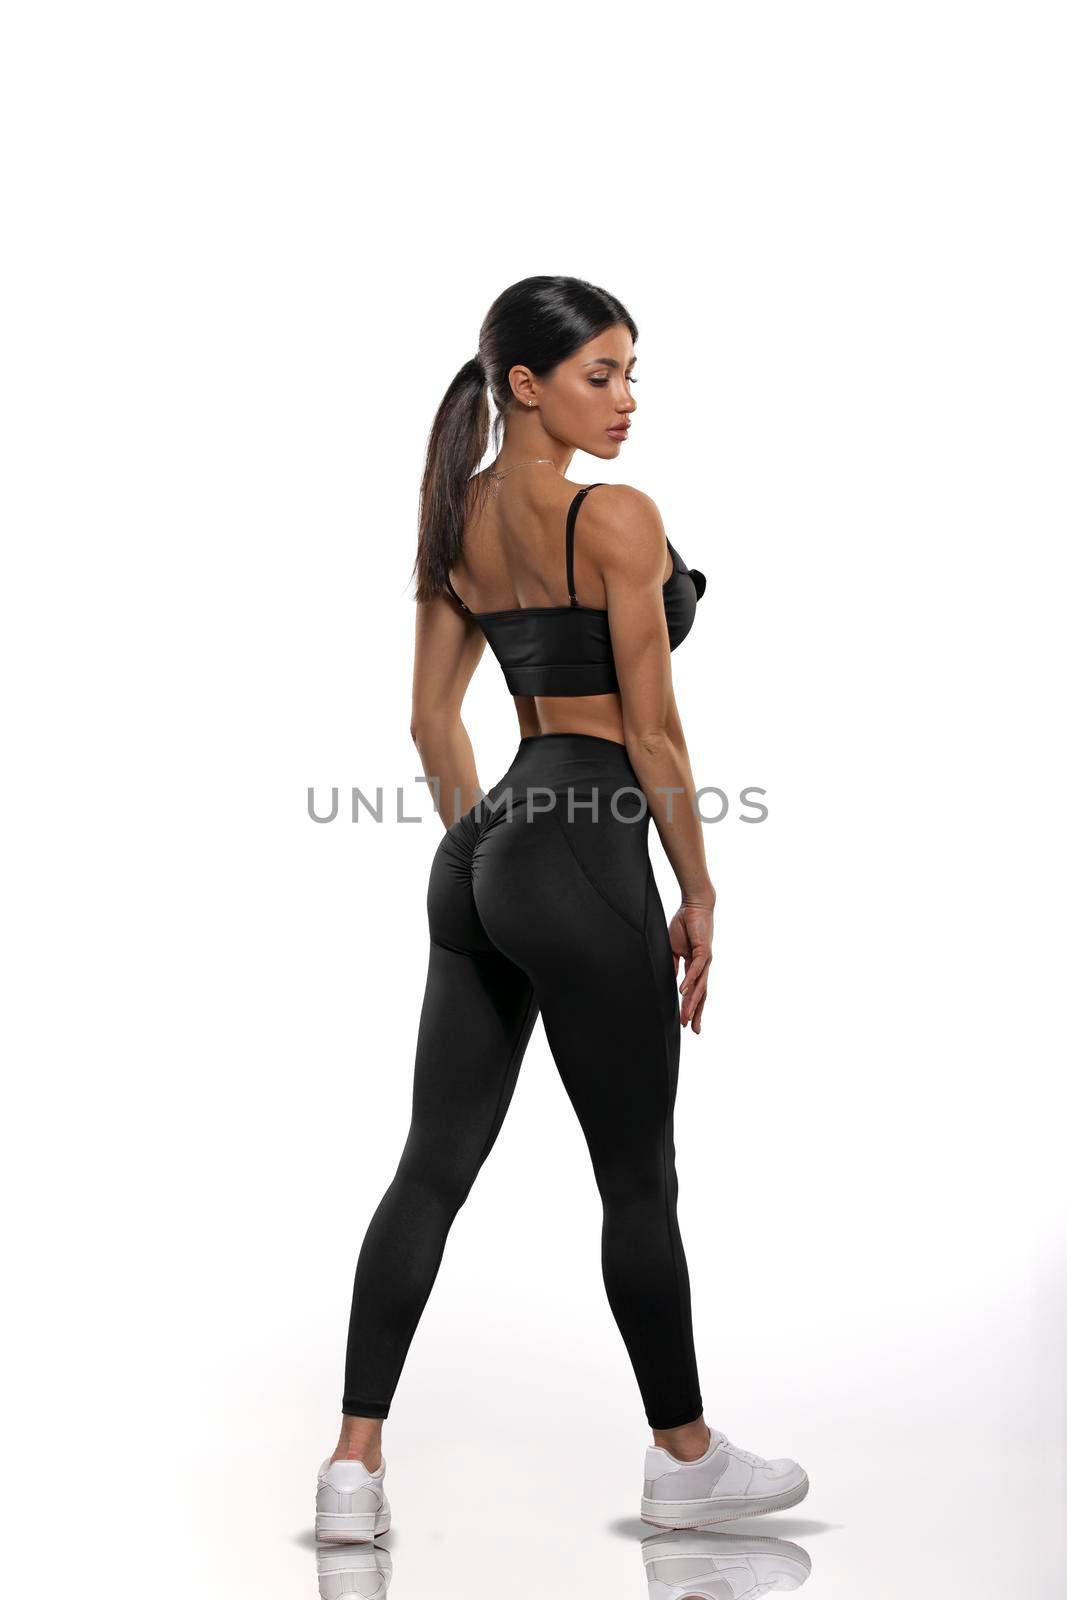 brunette girl in black leggings and a top stay back on a white background